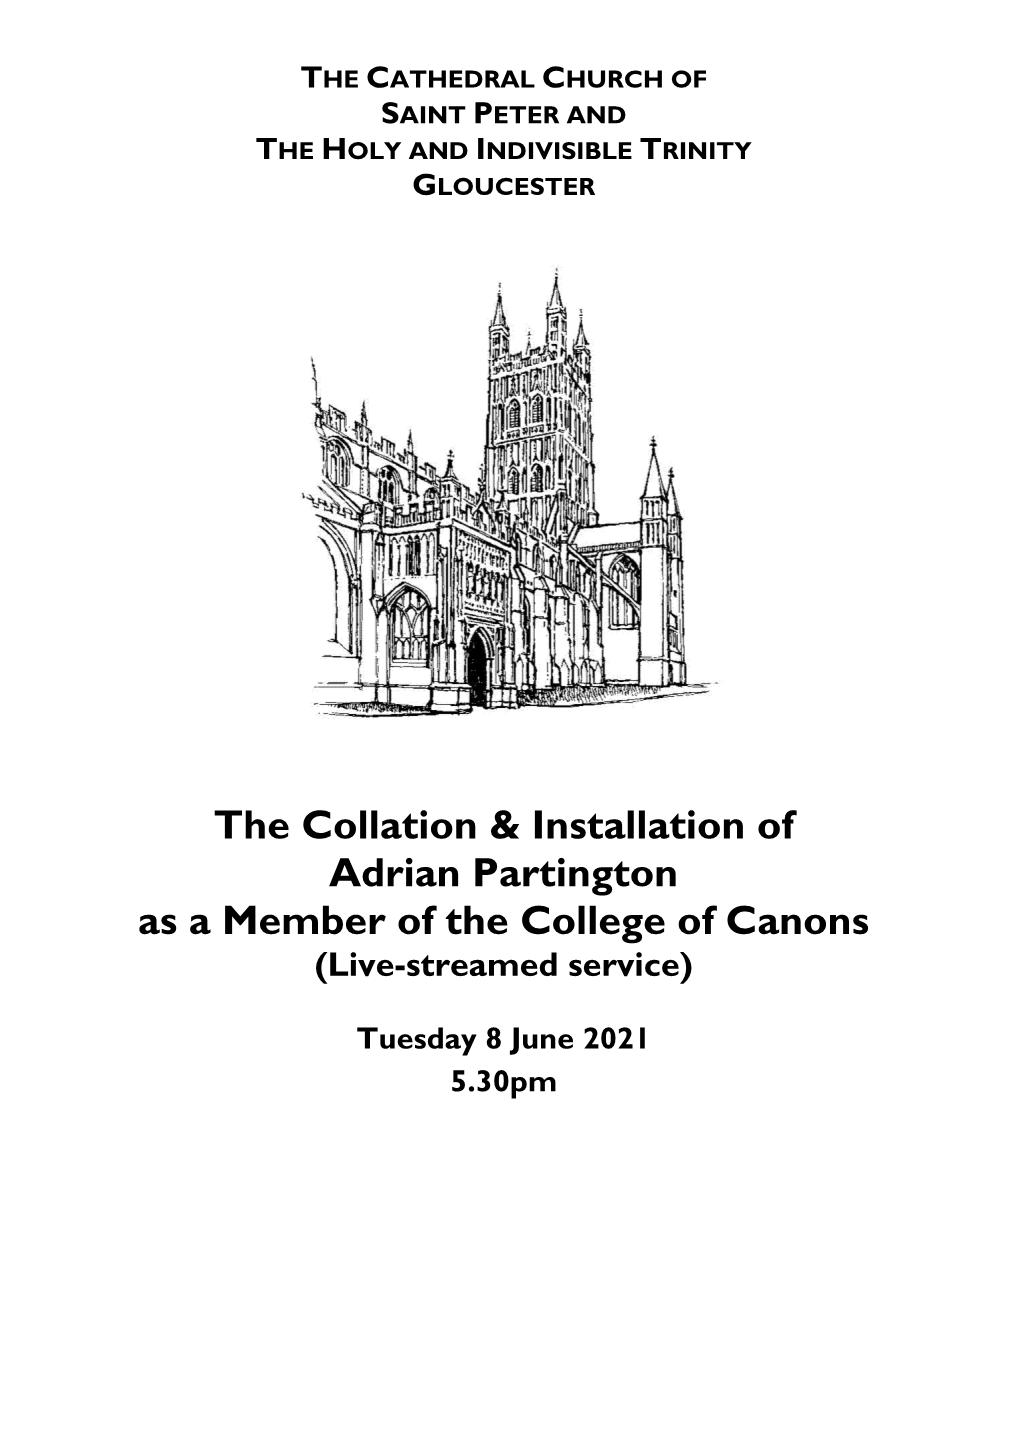 The Collation & Installation of Adrian Partington As a Member of The